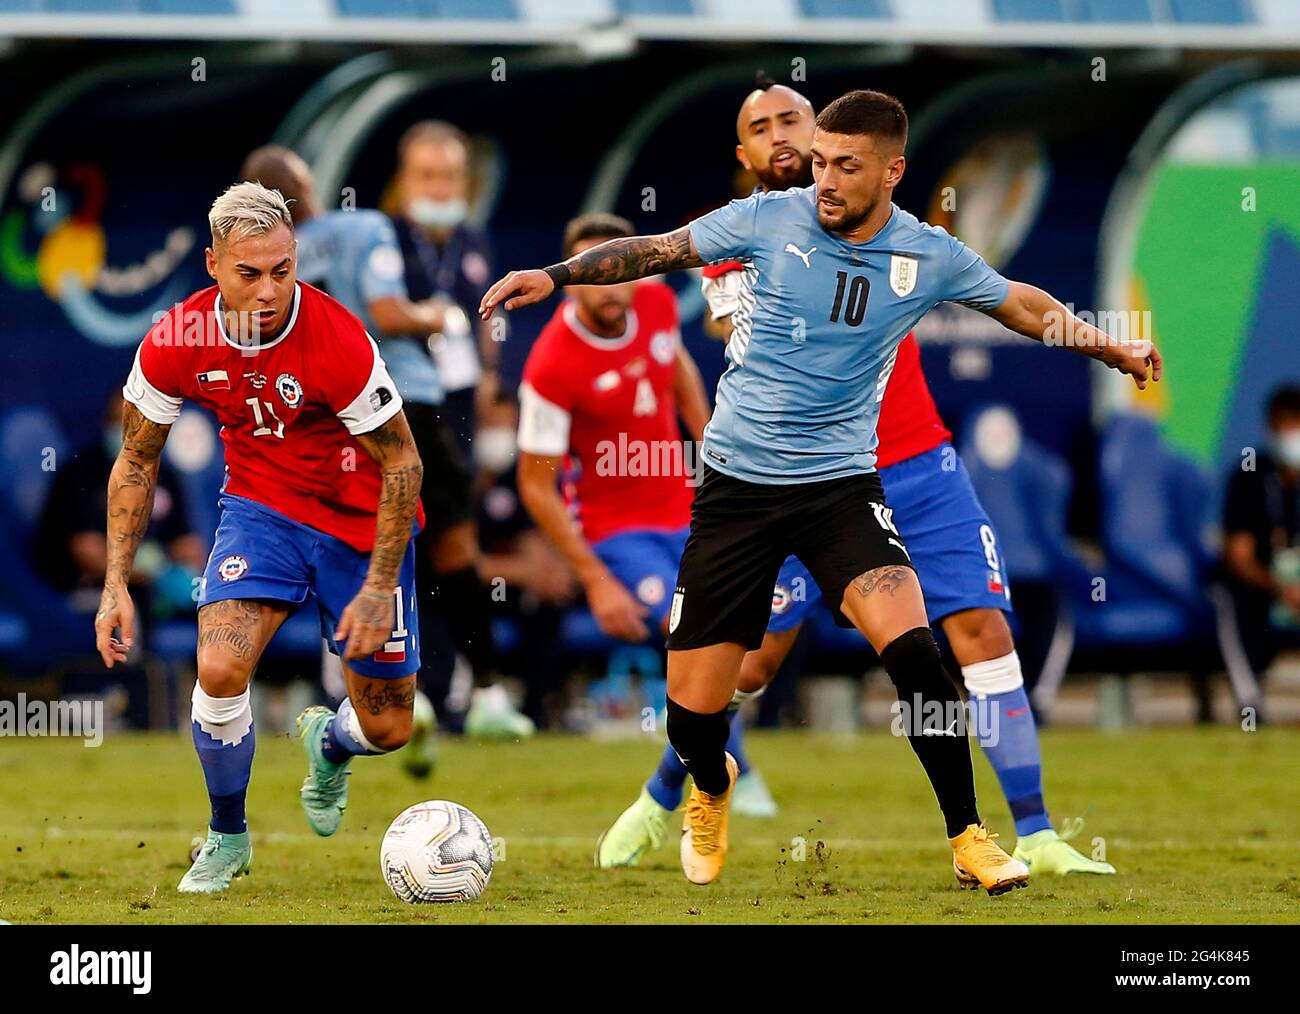 CUIABA, BRAZIL - JUNE 21: Eduardo Vargas of Chile competes for the ball with Giorgian De Arrascaeta of Uruguay ,during the match between Uruguay and Chile as part of Conmebol Copa America Brazil 2021 at Arena Pantanal on June 21, 2021 in Cuiaba, Brazil. (MB Media) Stock Photo